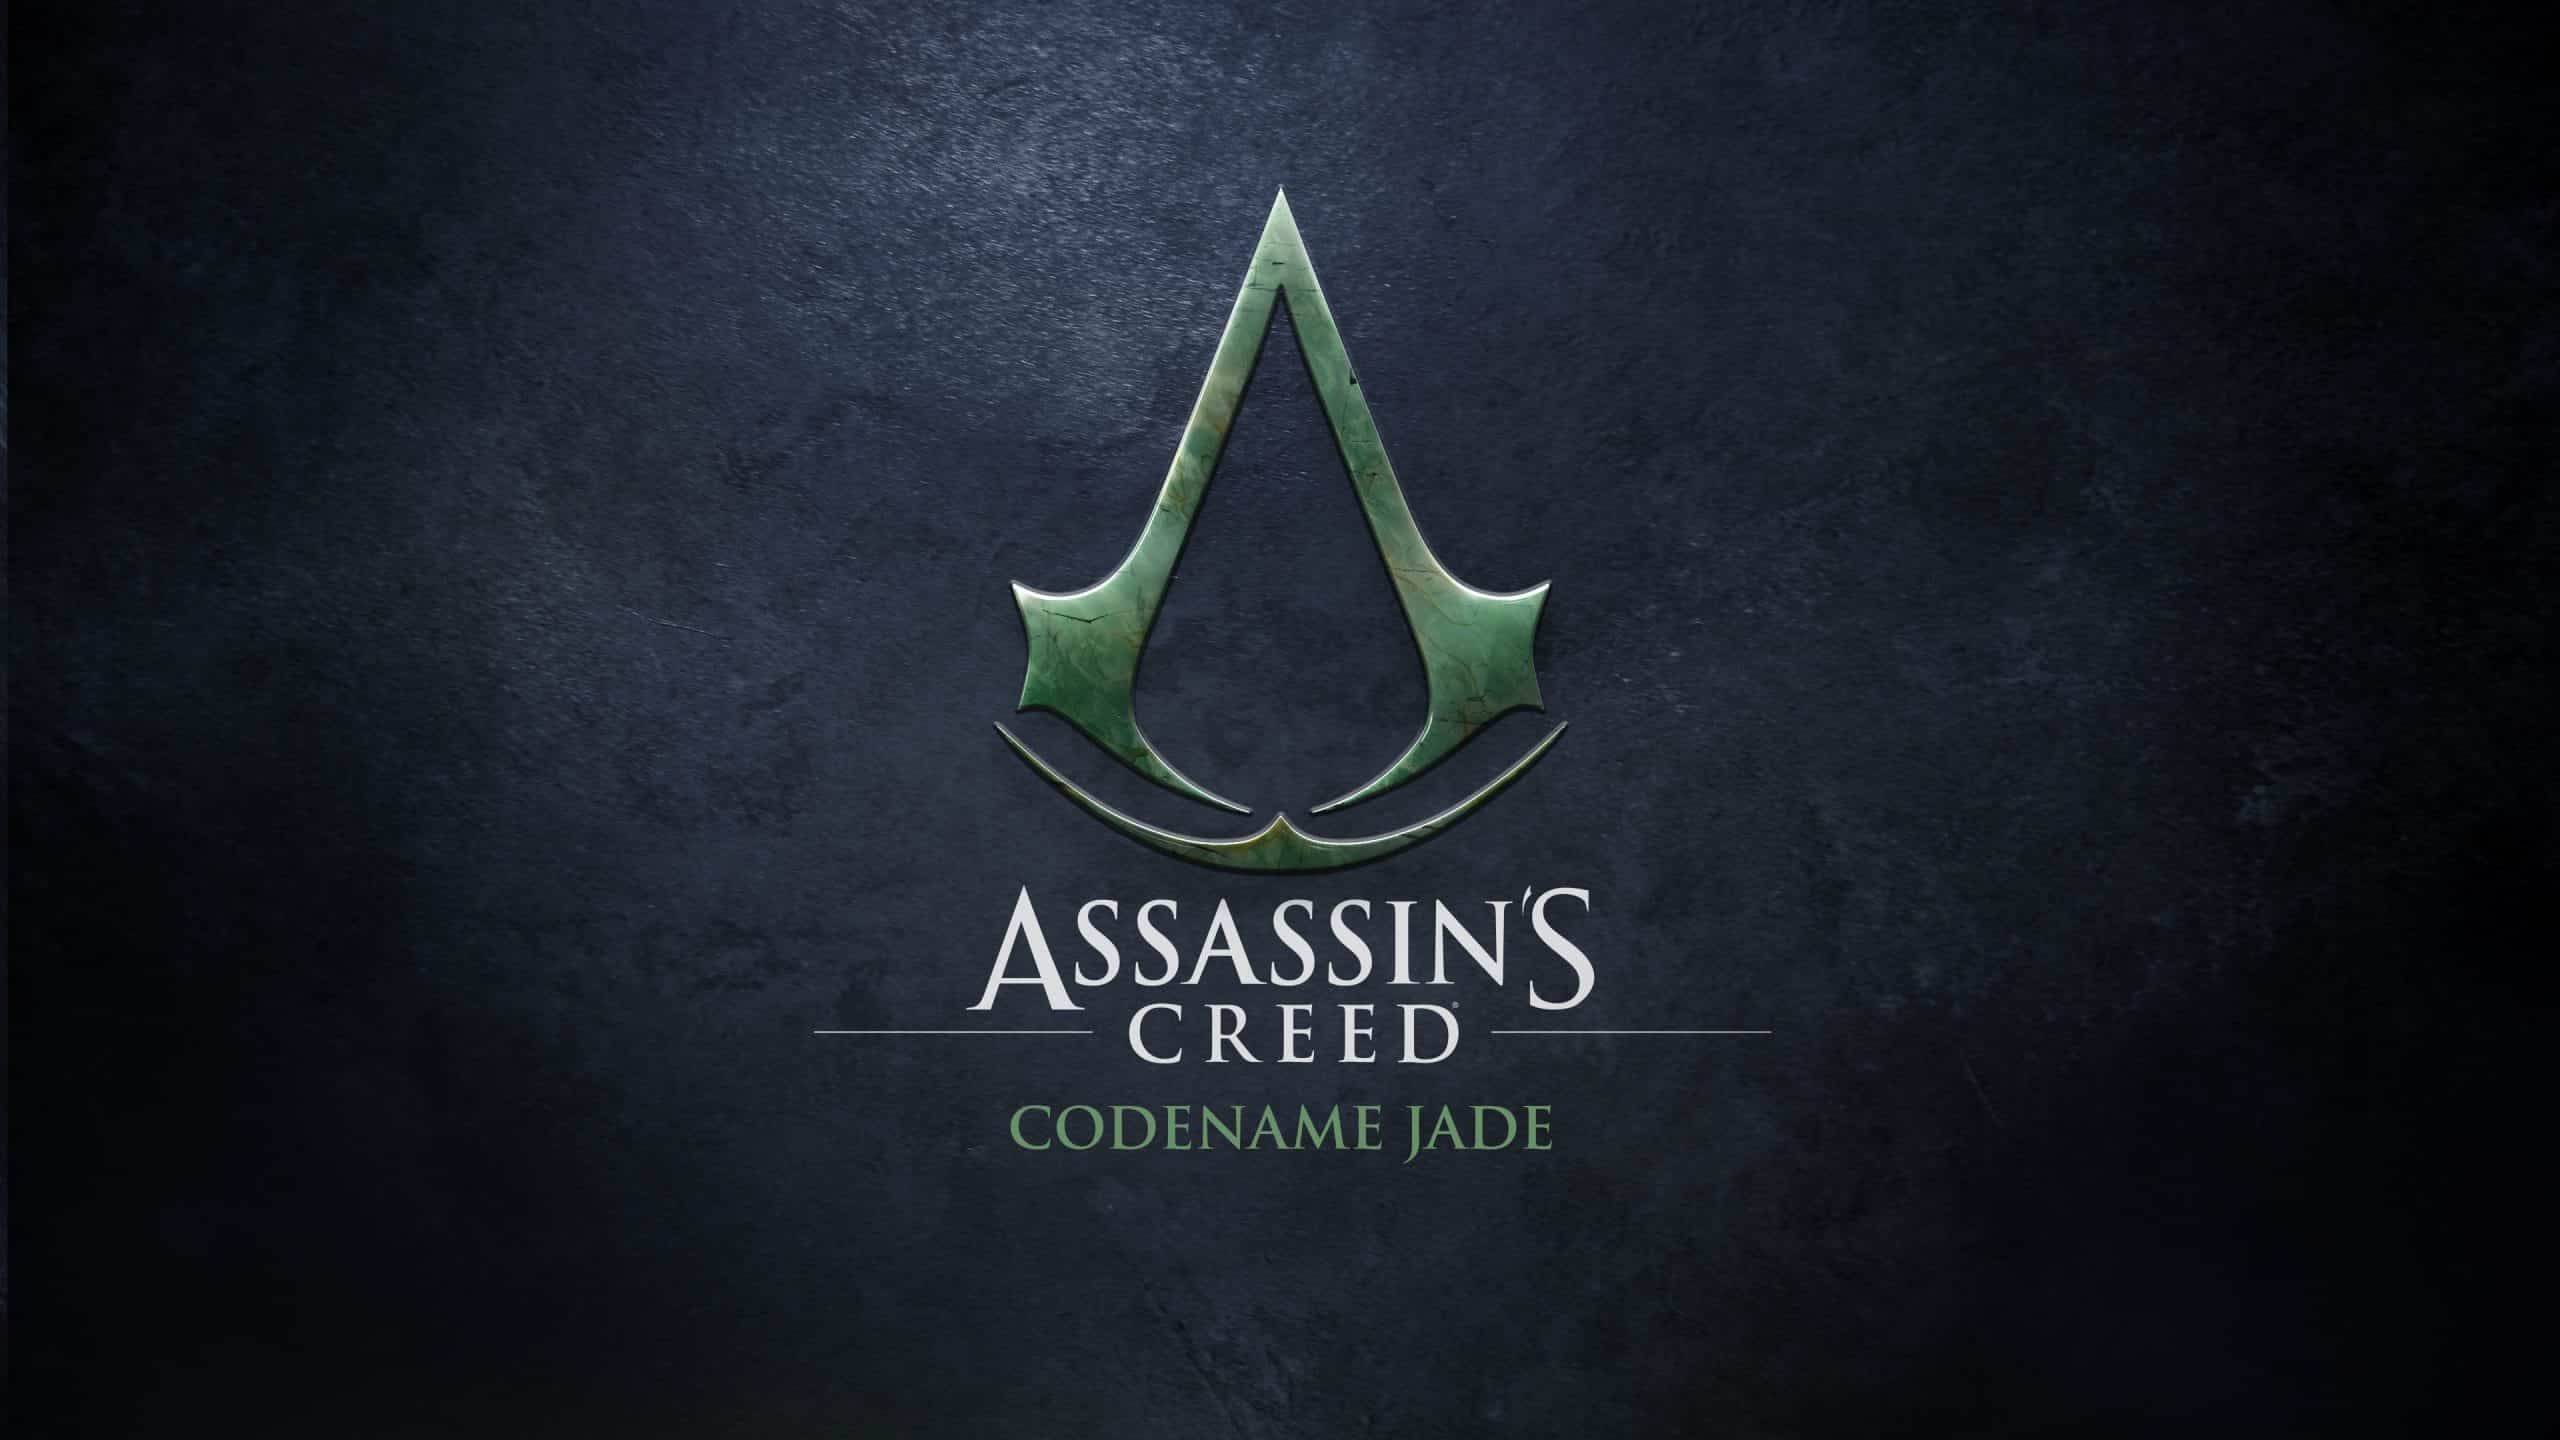 Assassin's Creed Codename Jade Announced for Mobile Platforms 111